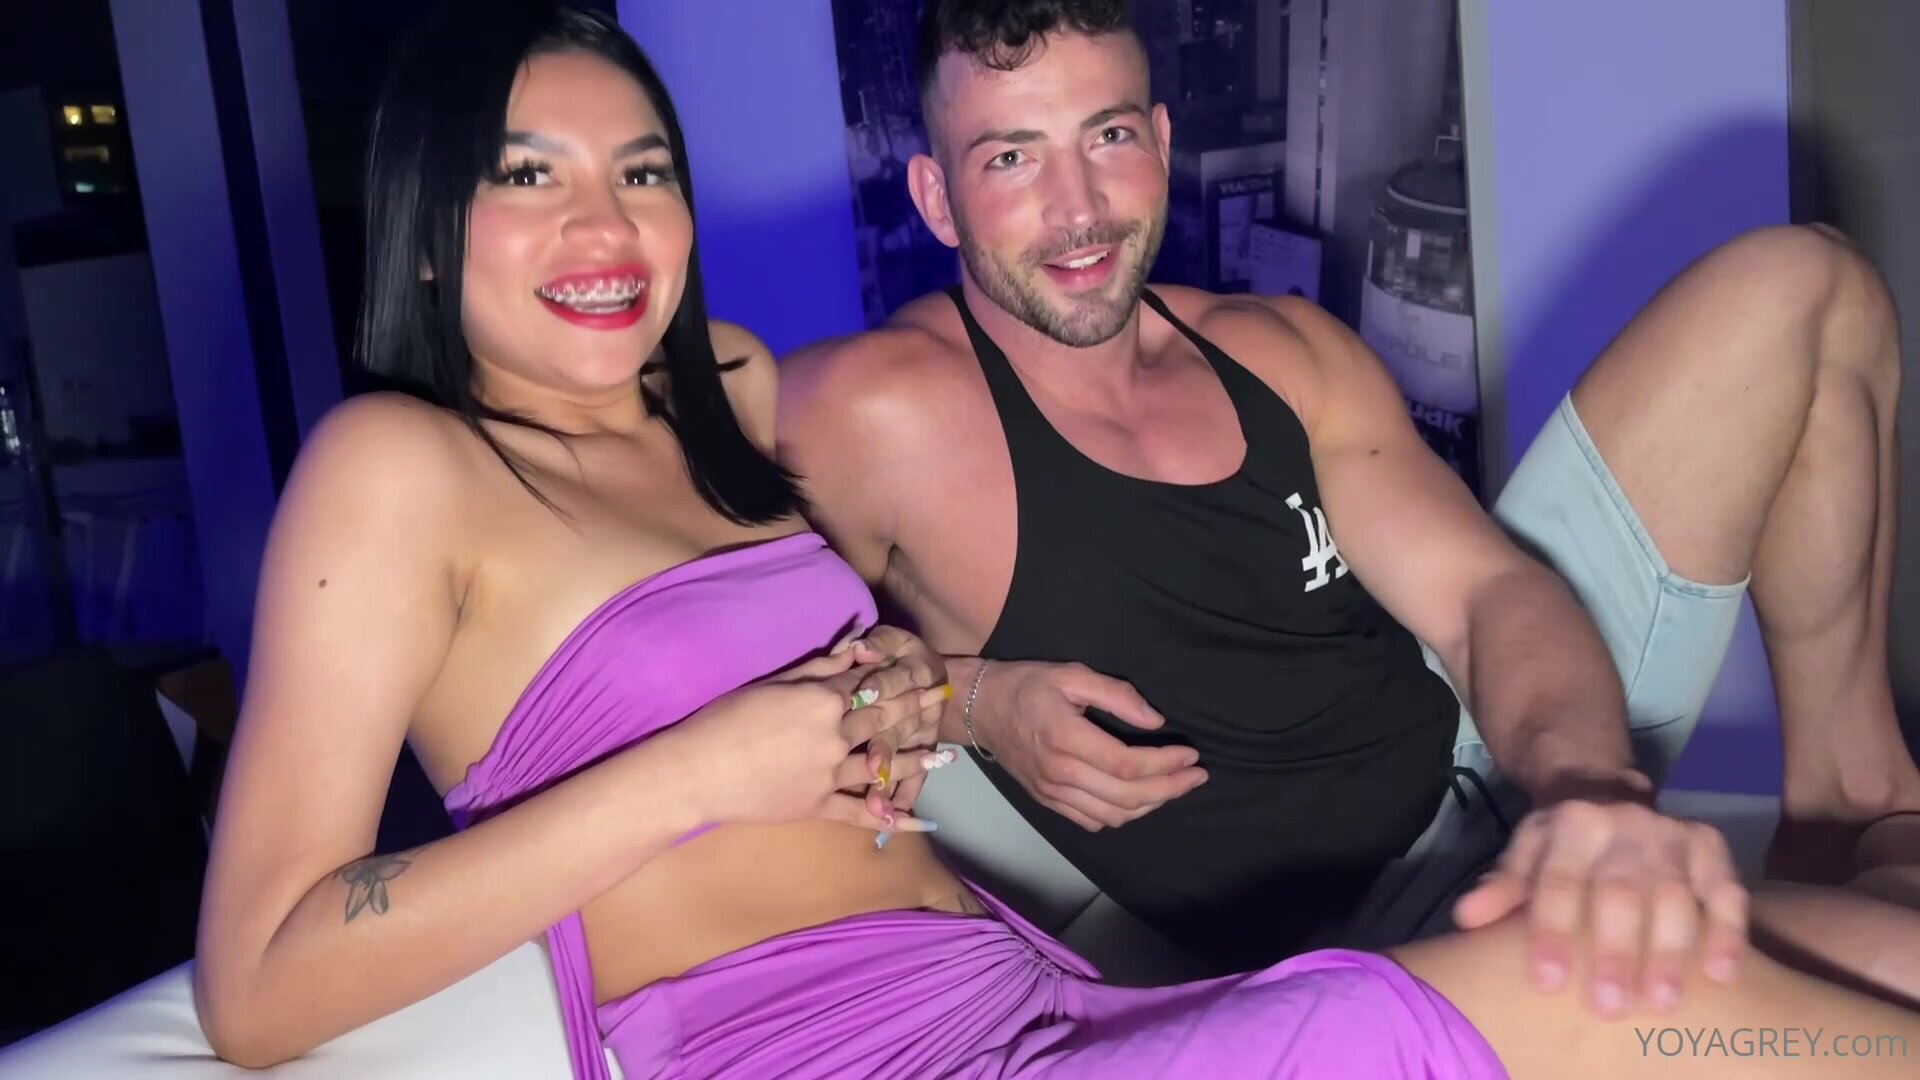 yoyagrey - First Sex Tape with @maximo_vip and @xamlove